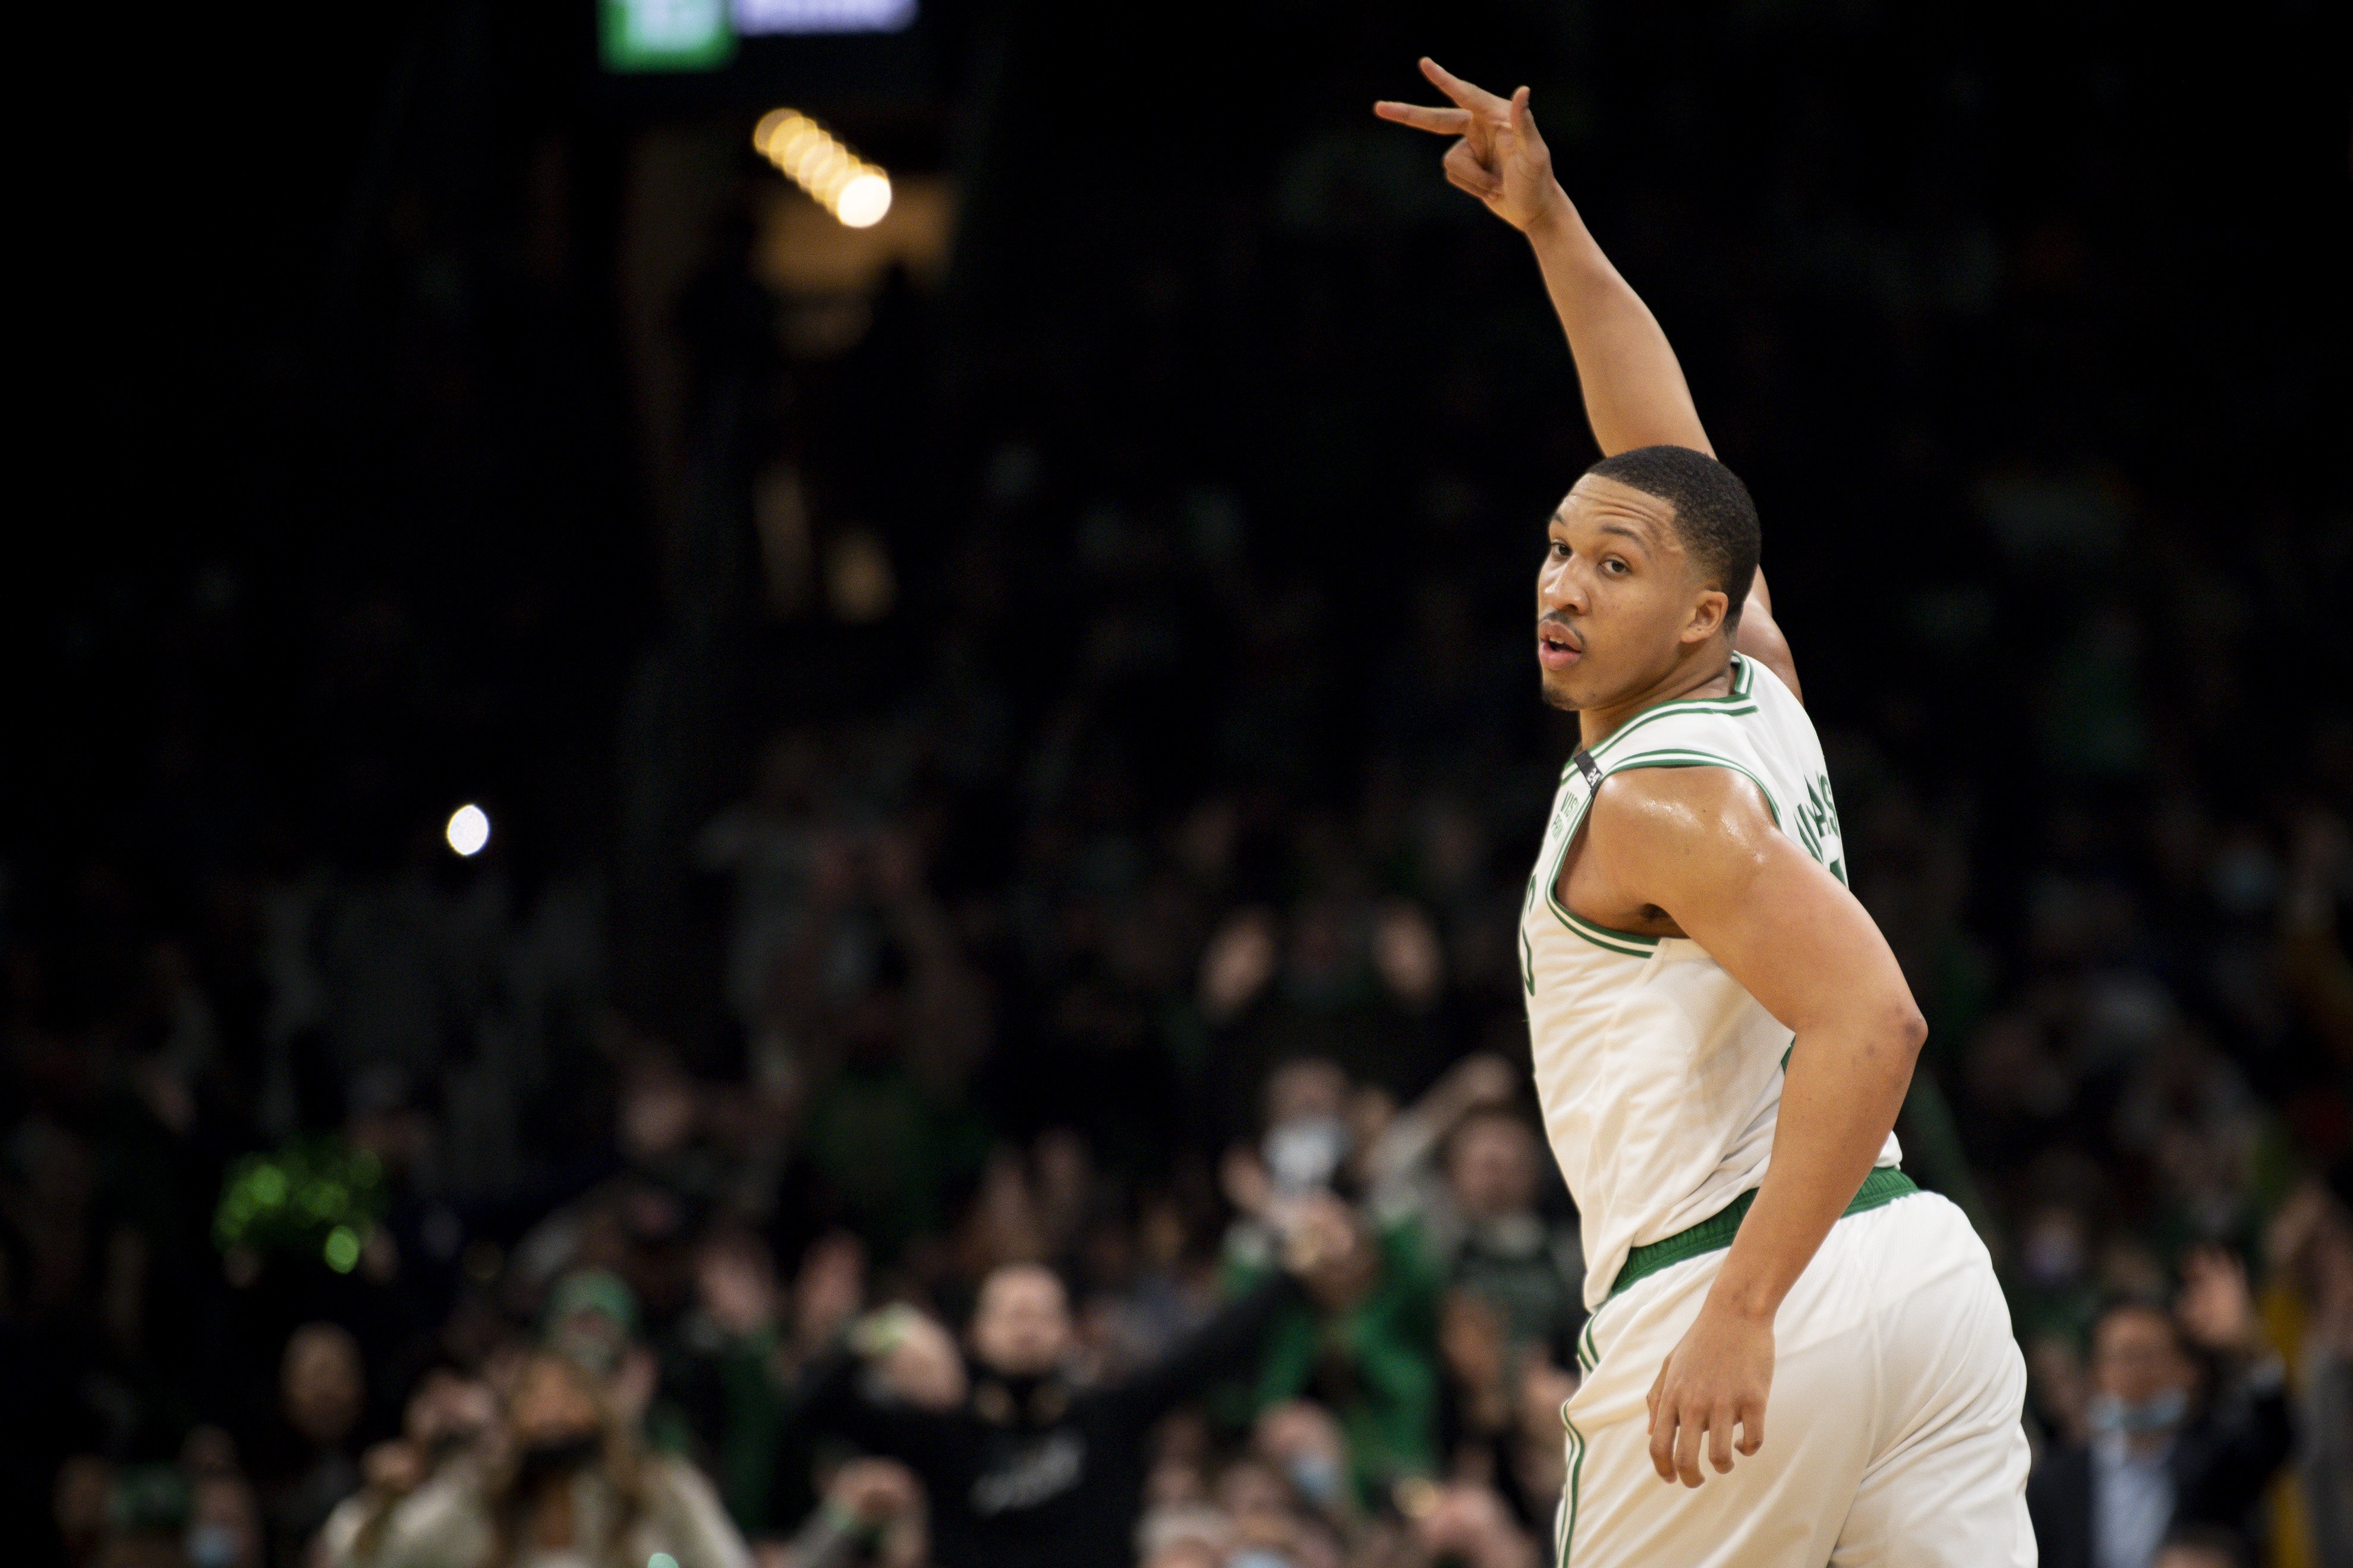 Boston Celtics forward Grant Williams celebrates a three-pointer during an NBA game against the Detroit Pistons in February 2022